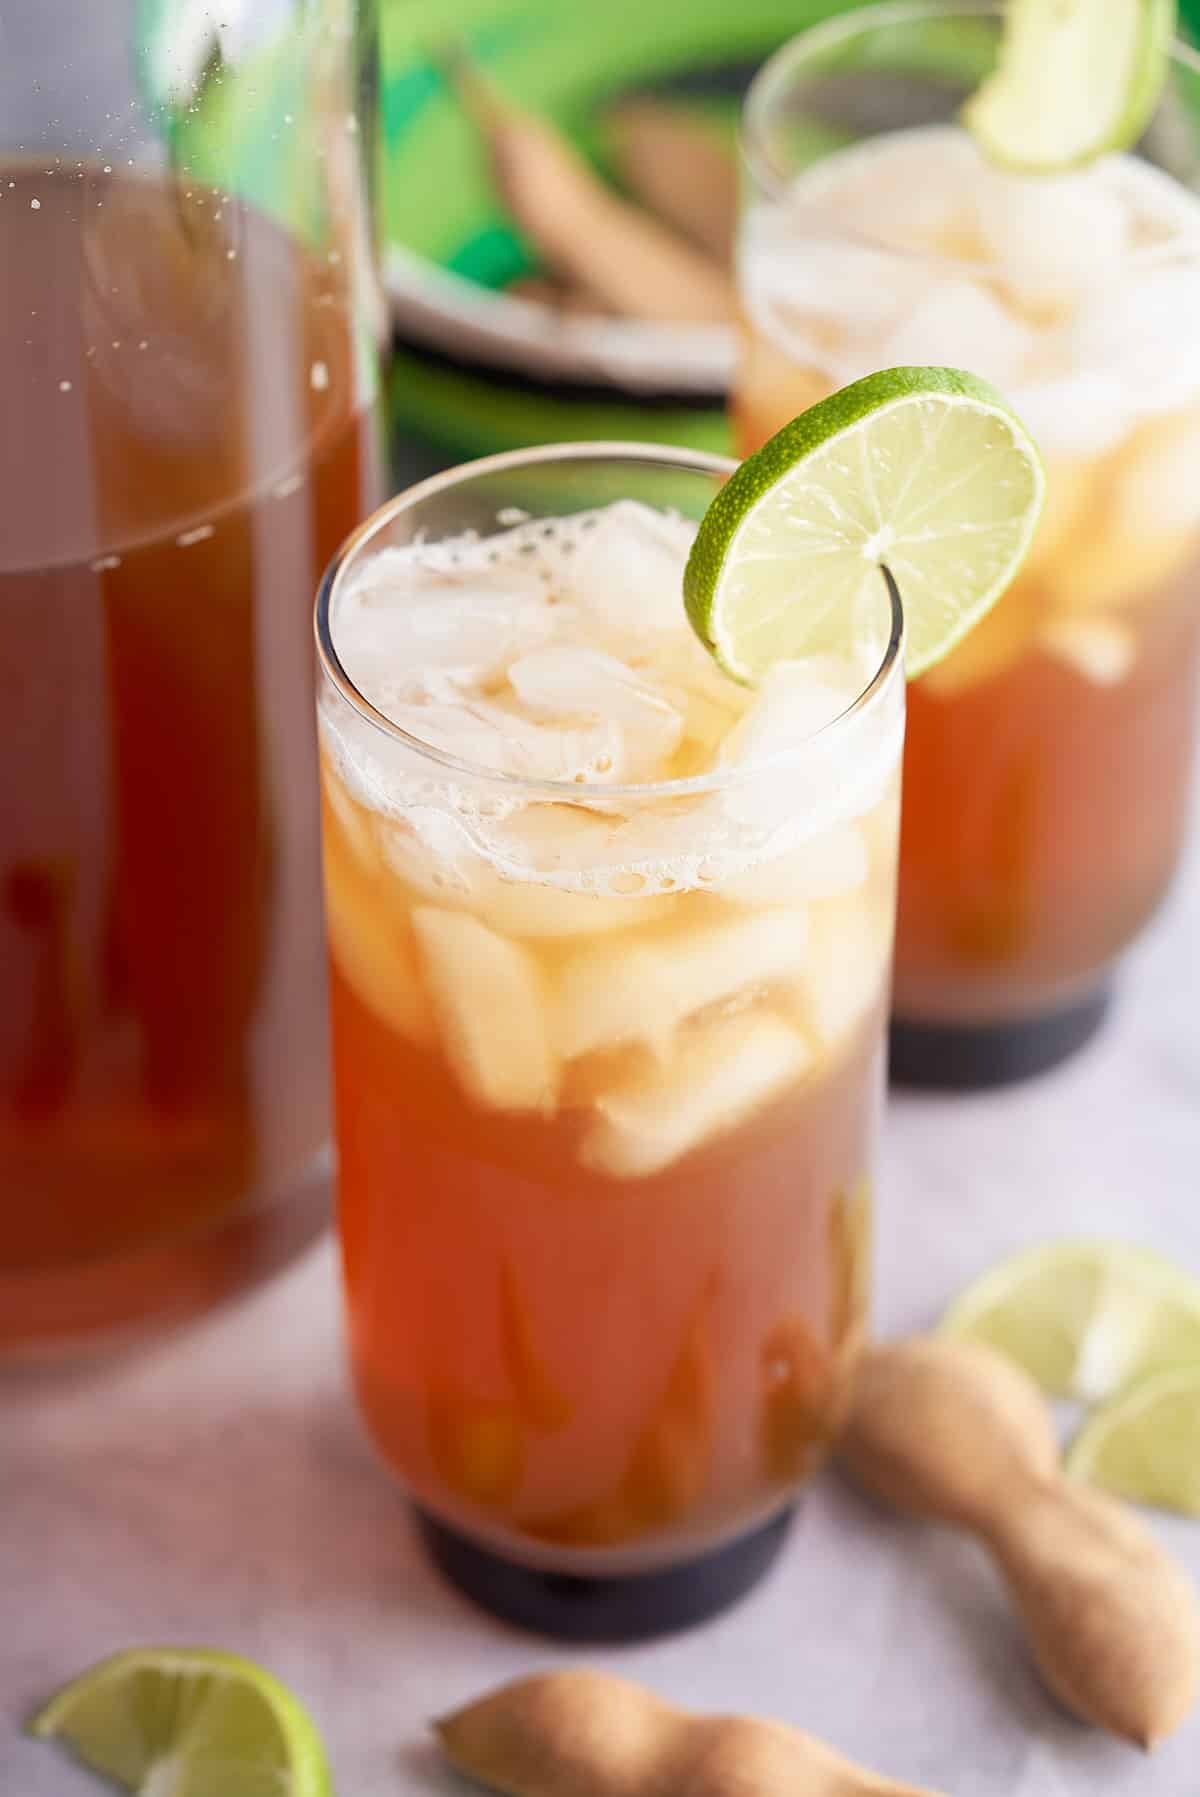 Two glasses of iced tamarind juice garnished with a slice of fresh lime.